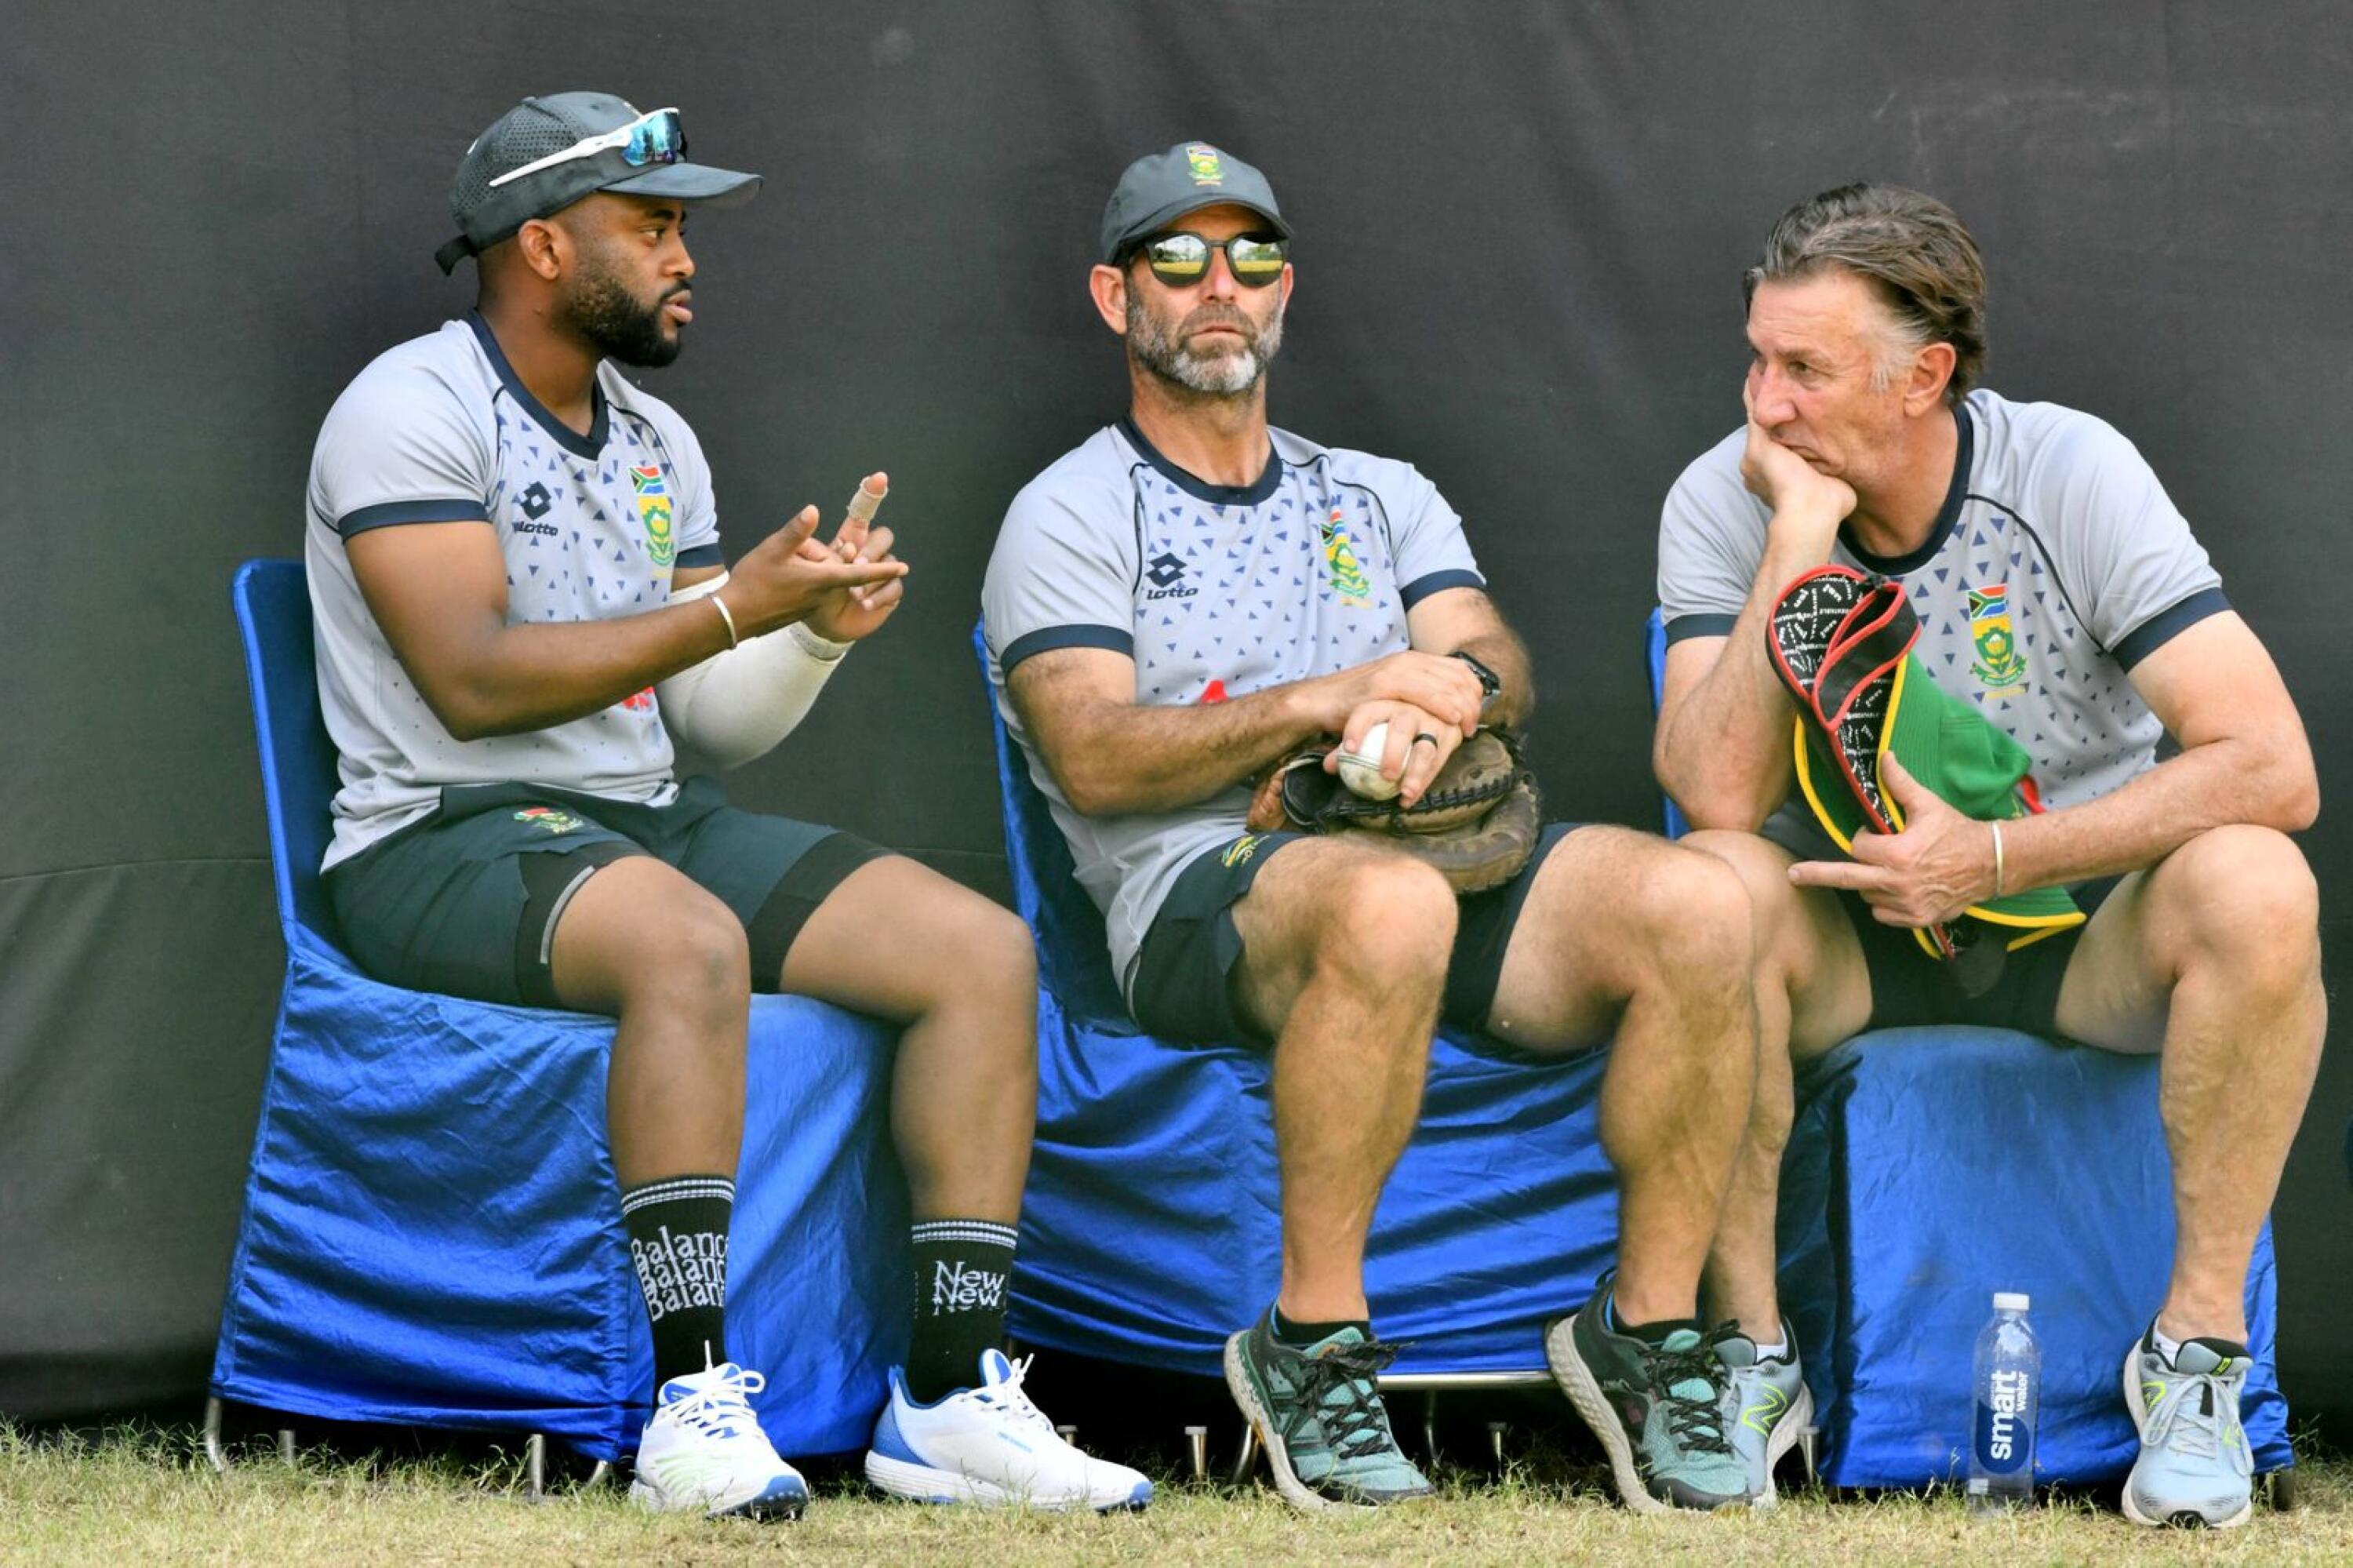 Proteas captain Temba Bavuma, head coach Rob Walter and bowling coach Eric Simons discuss tactics ahead of a practice session at the Cricket World Cup.